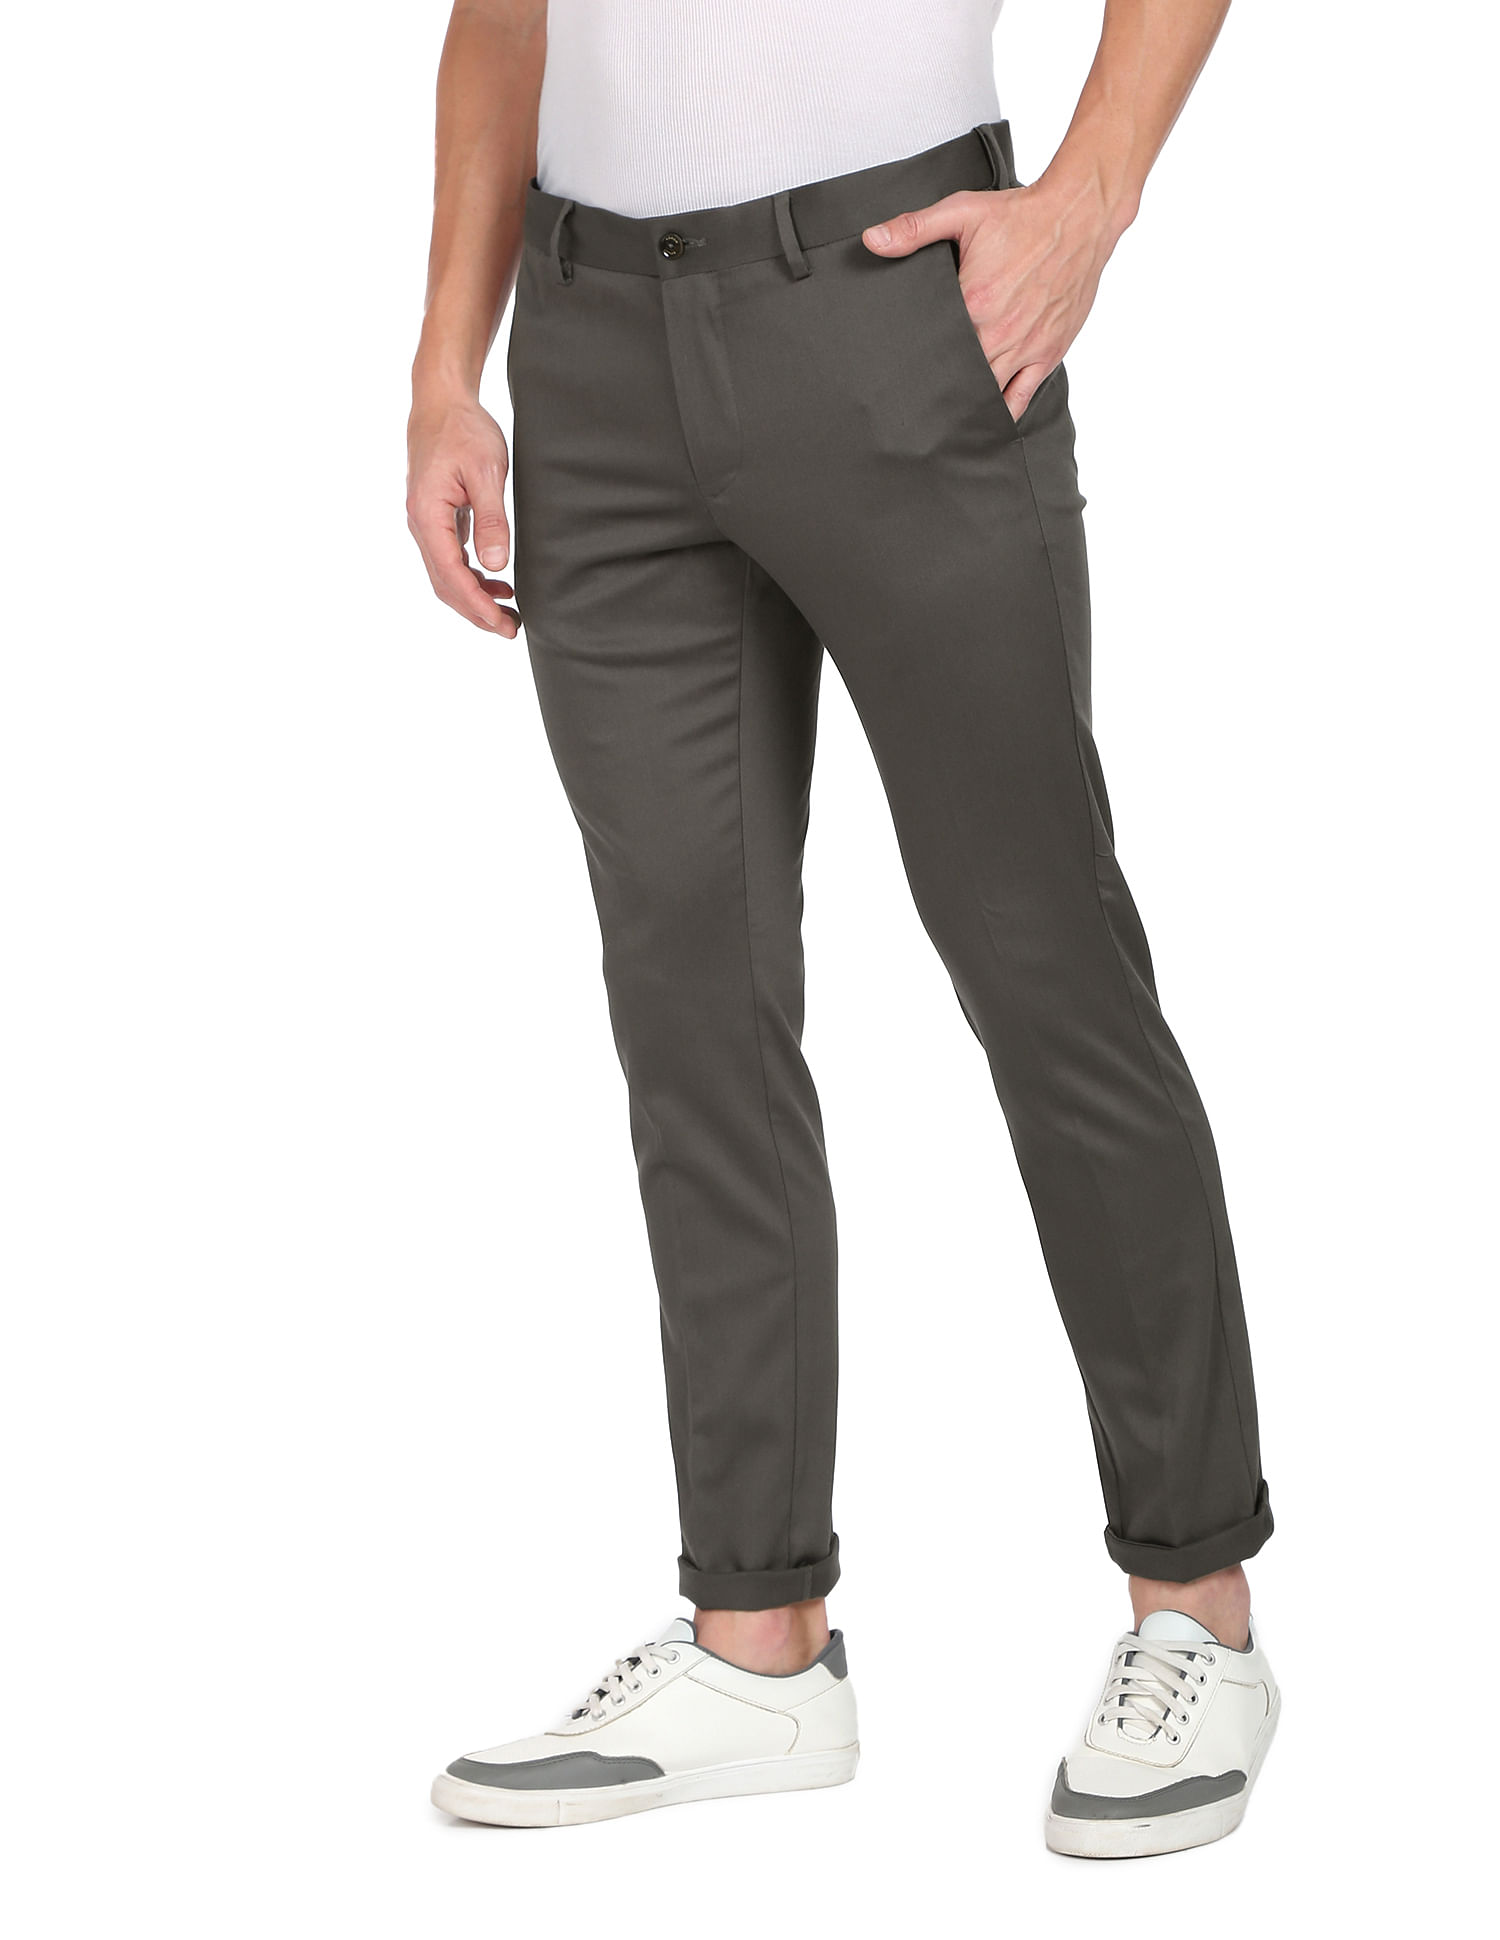 Gents Grey Sports Trousers Taylor  Taylor Bowls Taylor